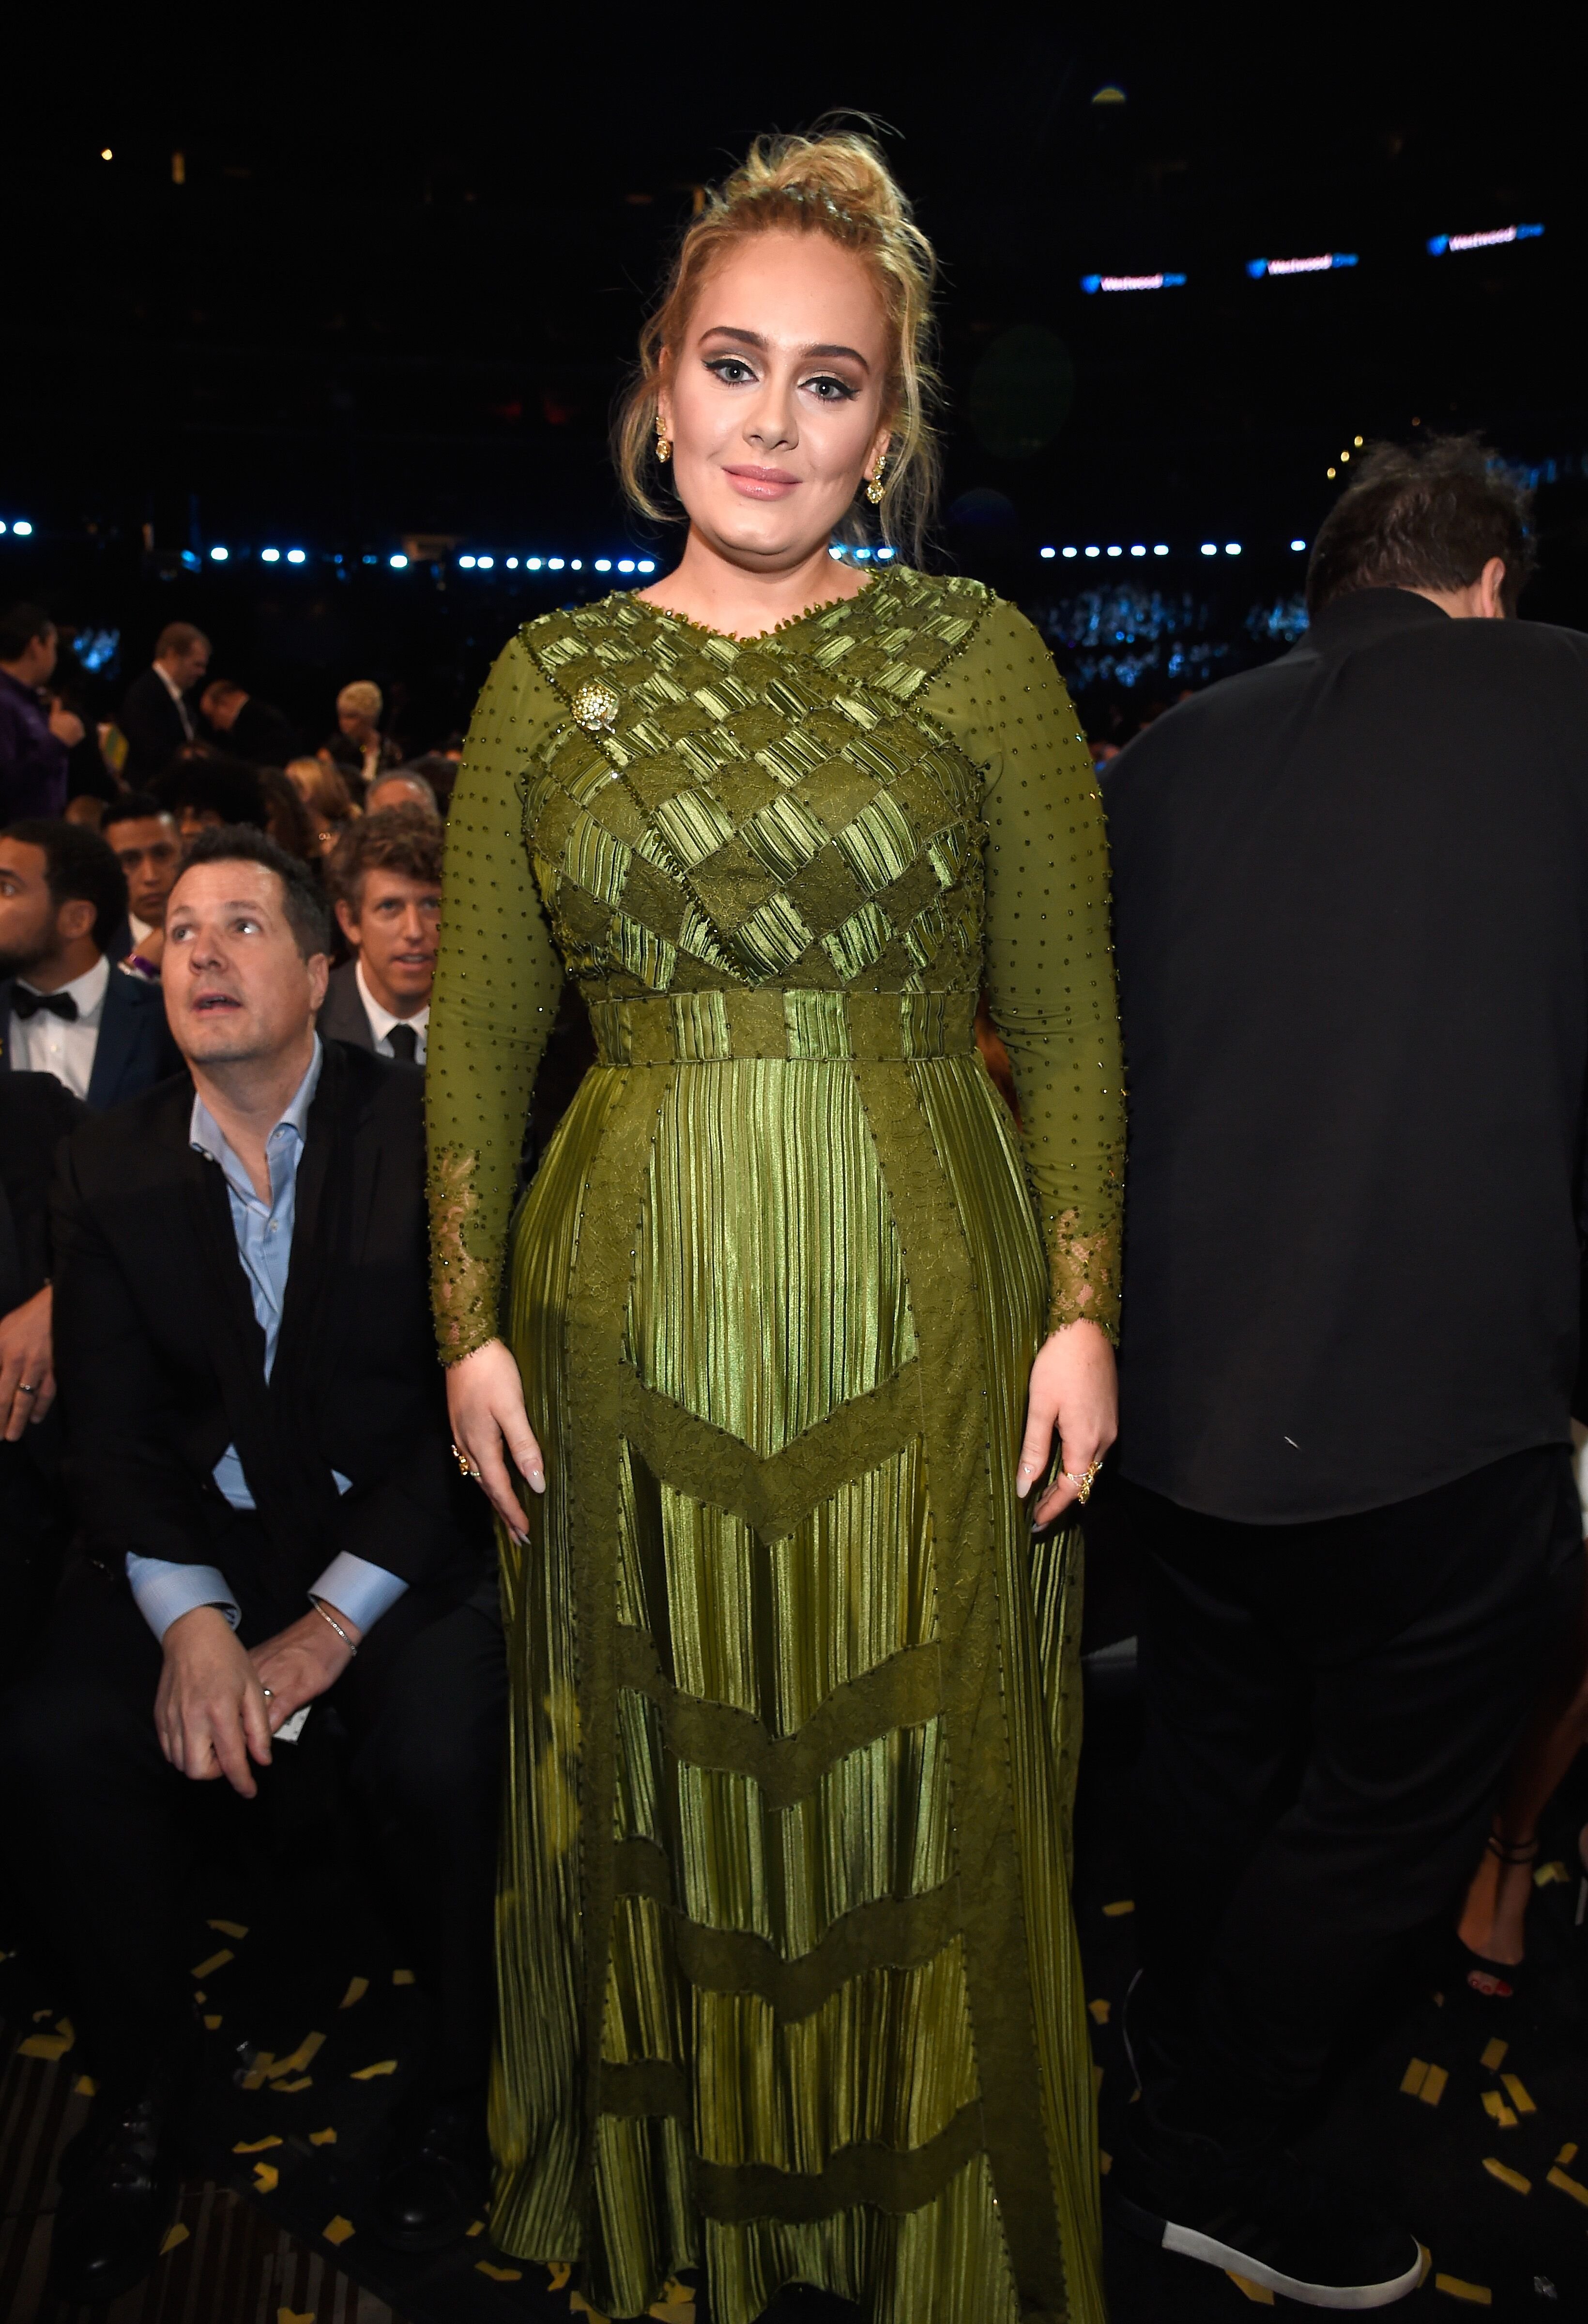 Adele during The 59th GRAMMY Awards at STAPLES Center on February 12, 2017 in Los Angeles, California. | Source: Getty Images